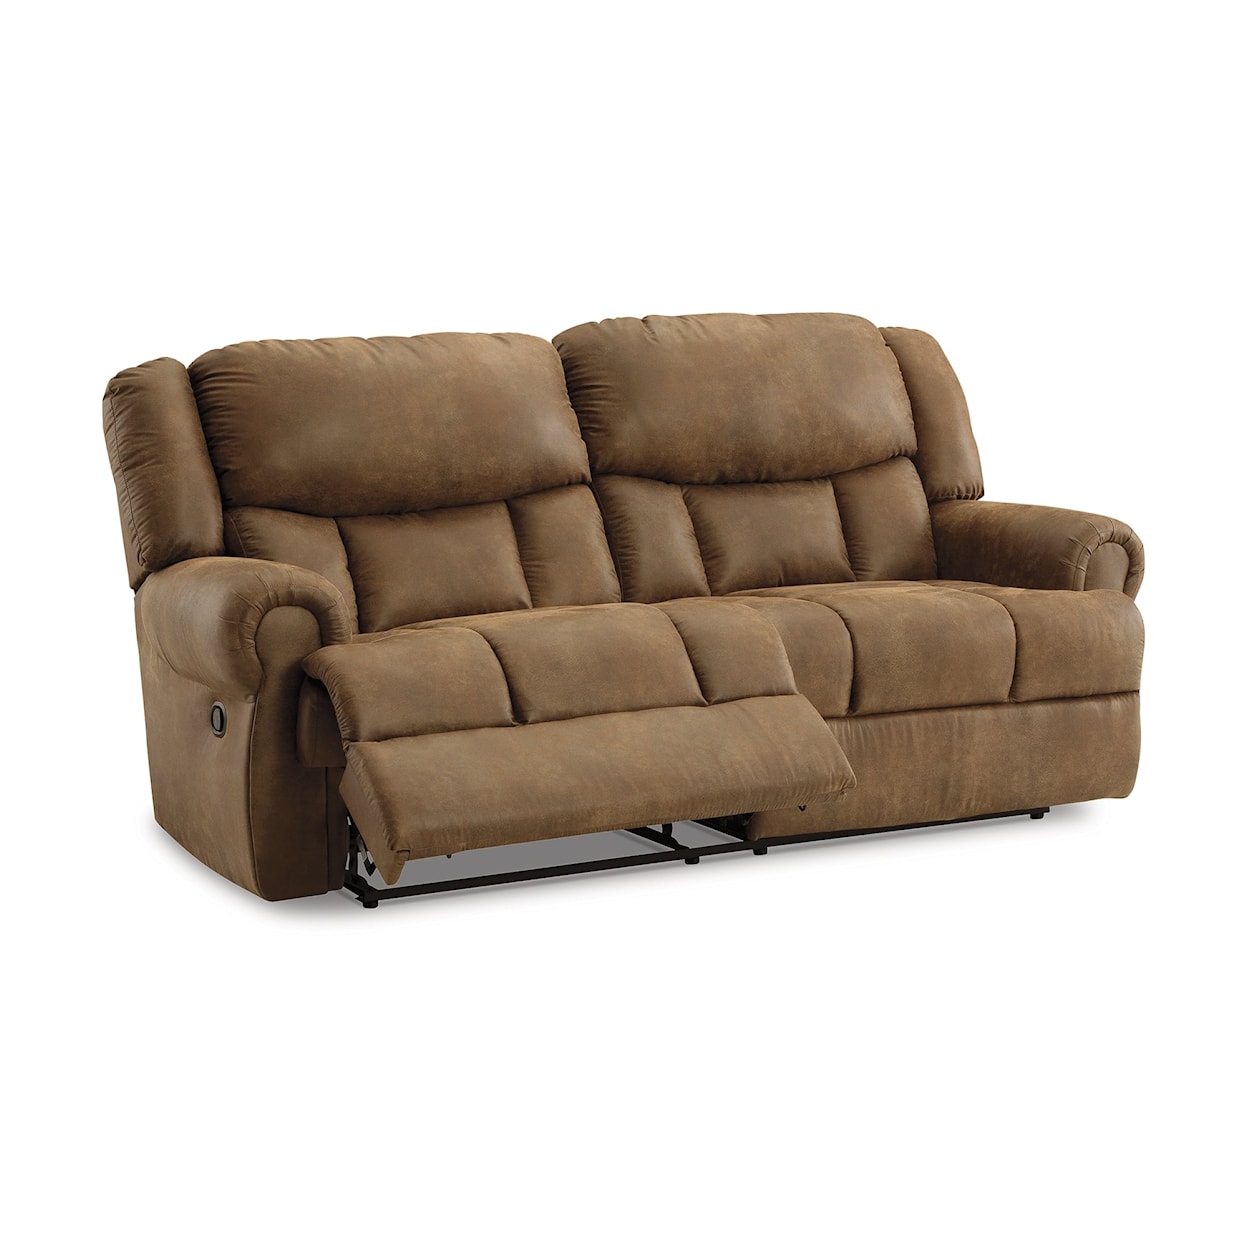 Signature Design by Ashley Boothbay 2 Seat Reclining Sofa